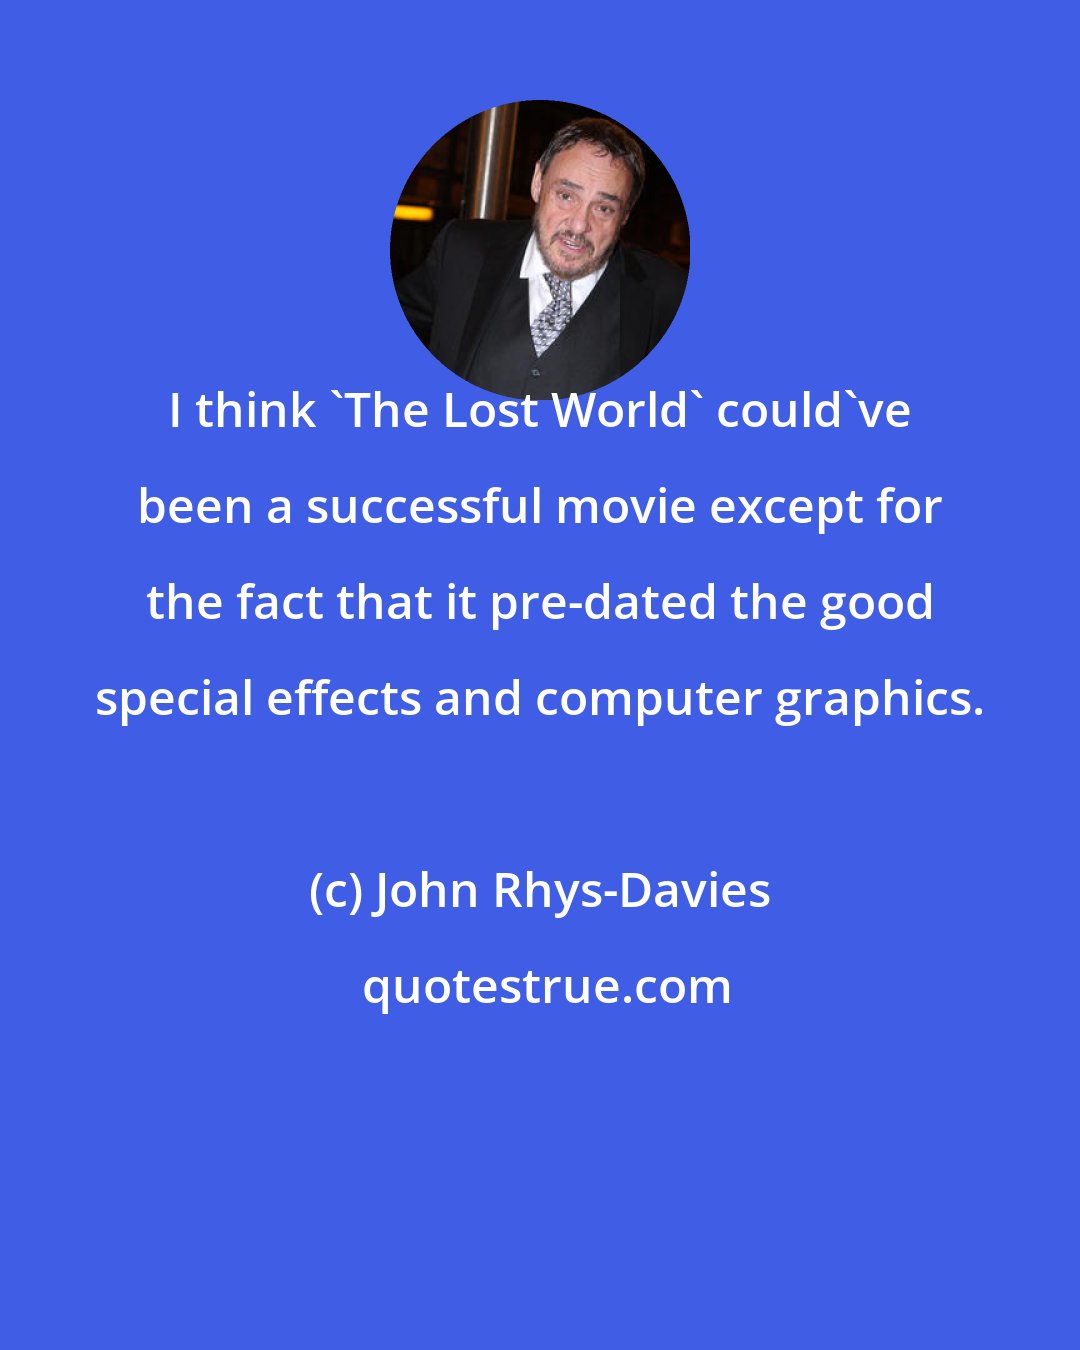 John Rhys-Davies: I think 'The Lost World' could've been a successful movie except for the fact that it pre-dated the good special effects and computer graphics.